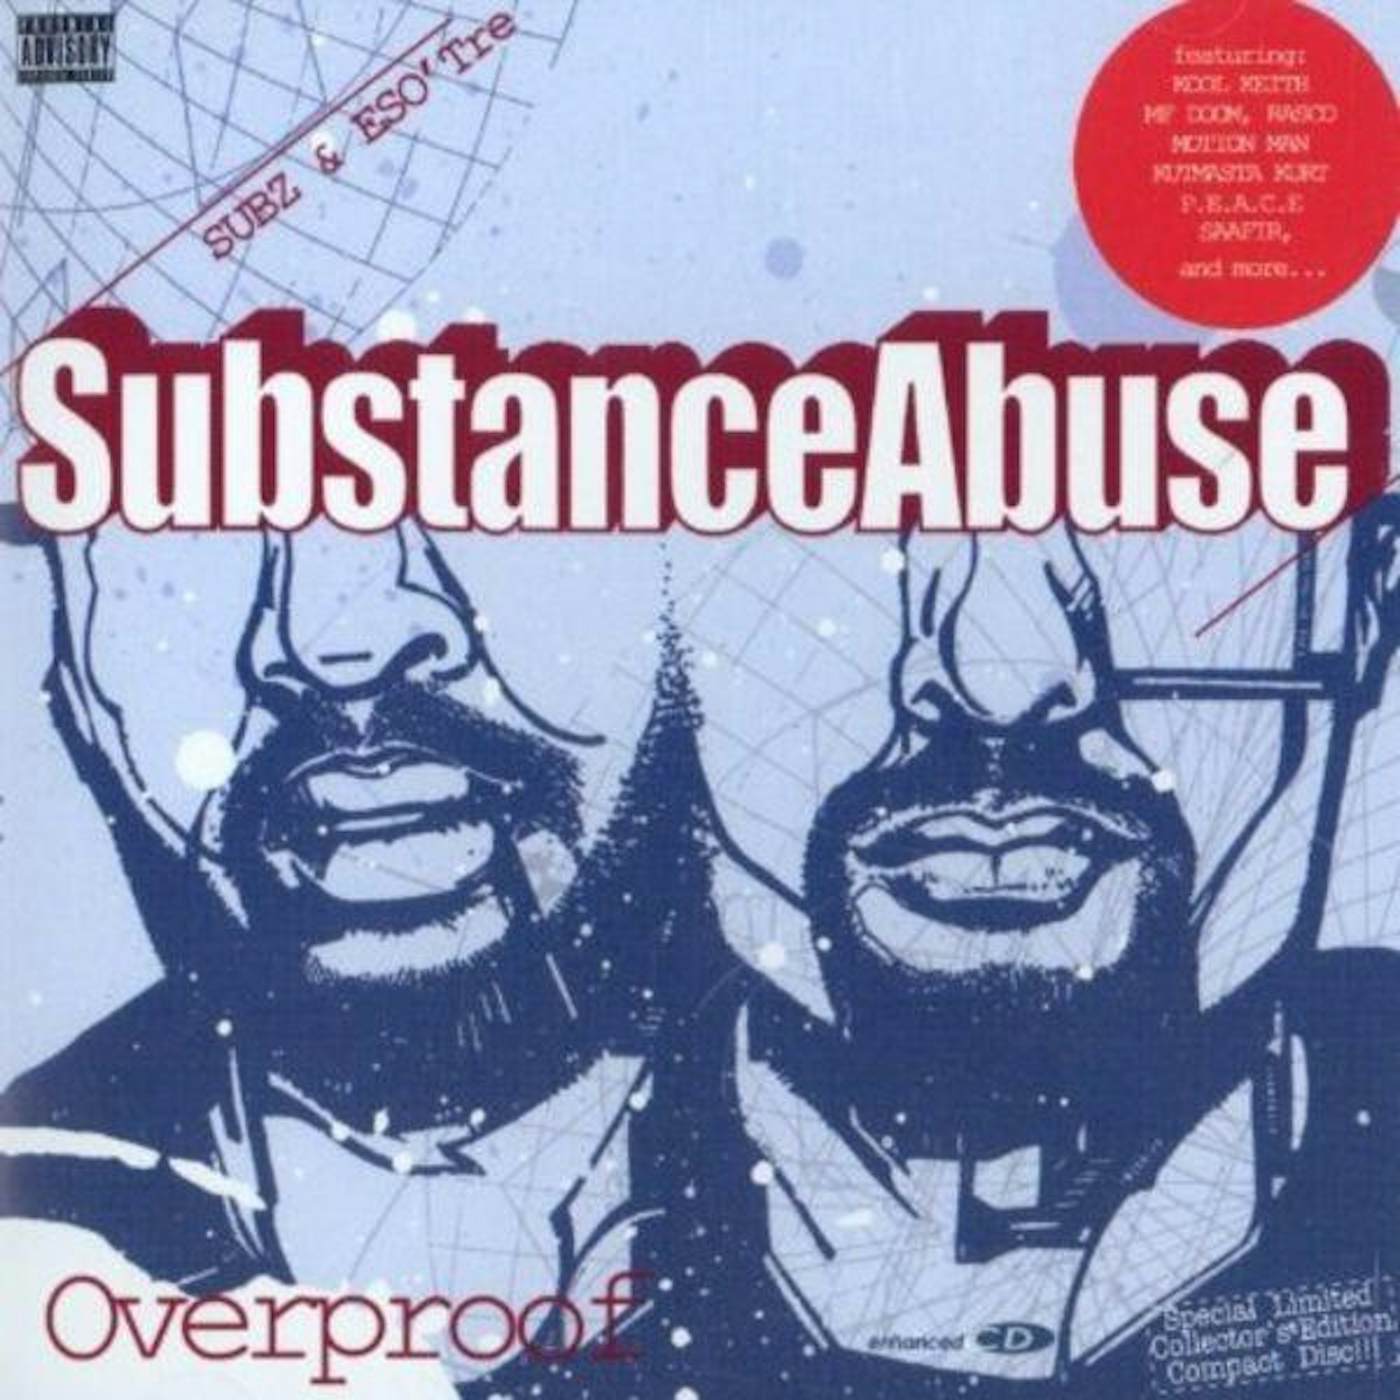 Substance Abuse OVERPROOF Vinyl Record